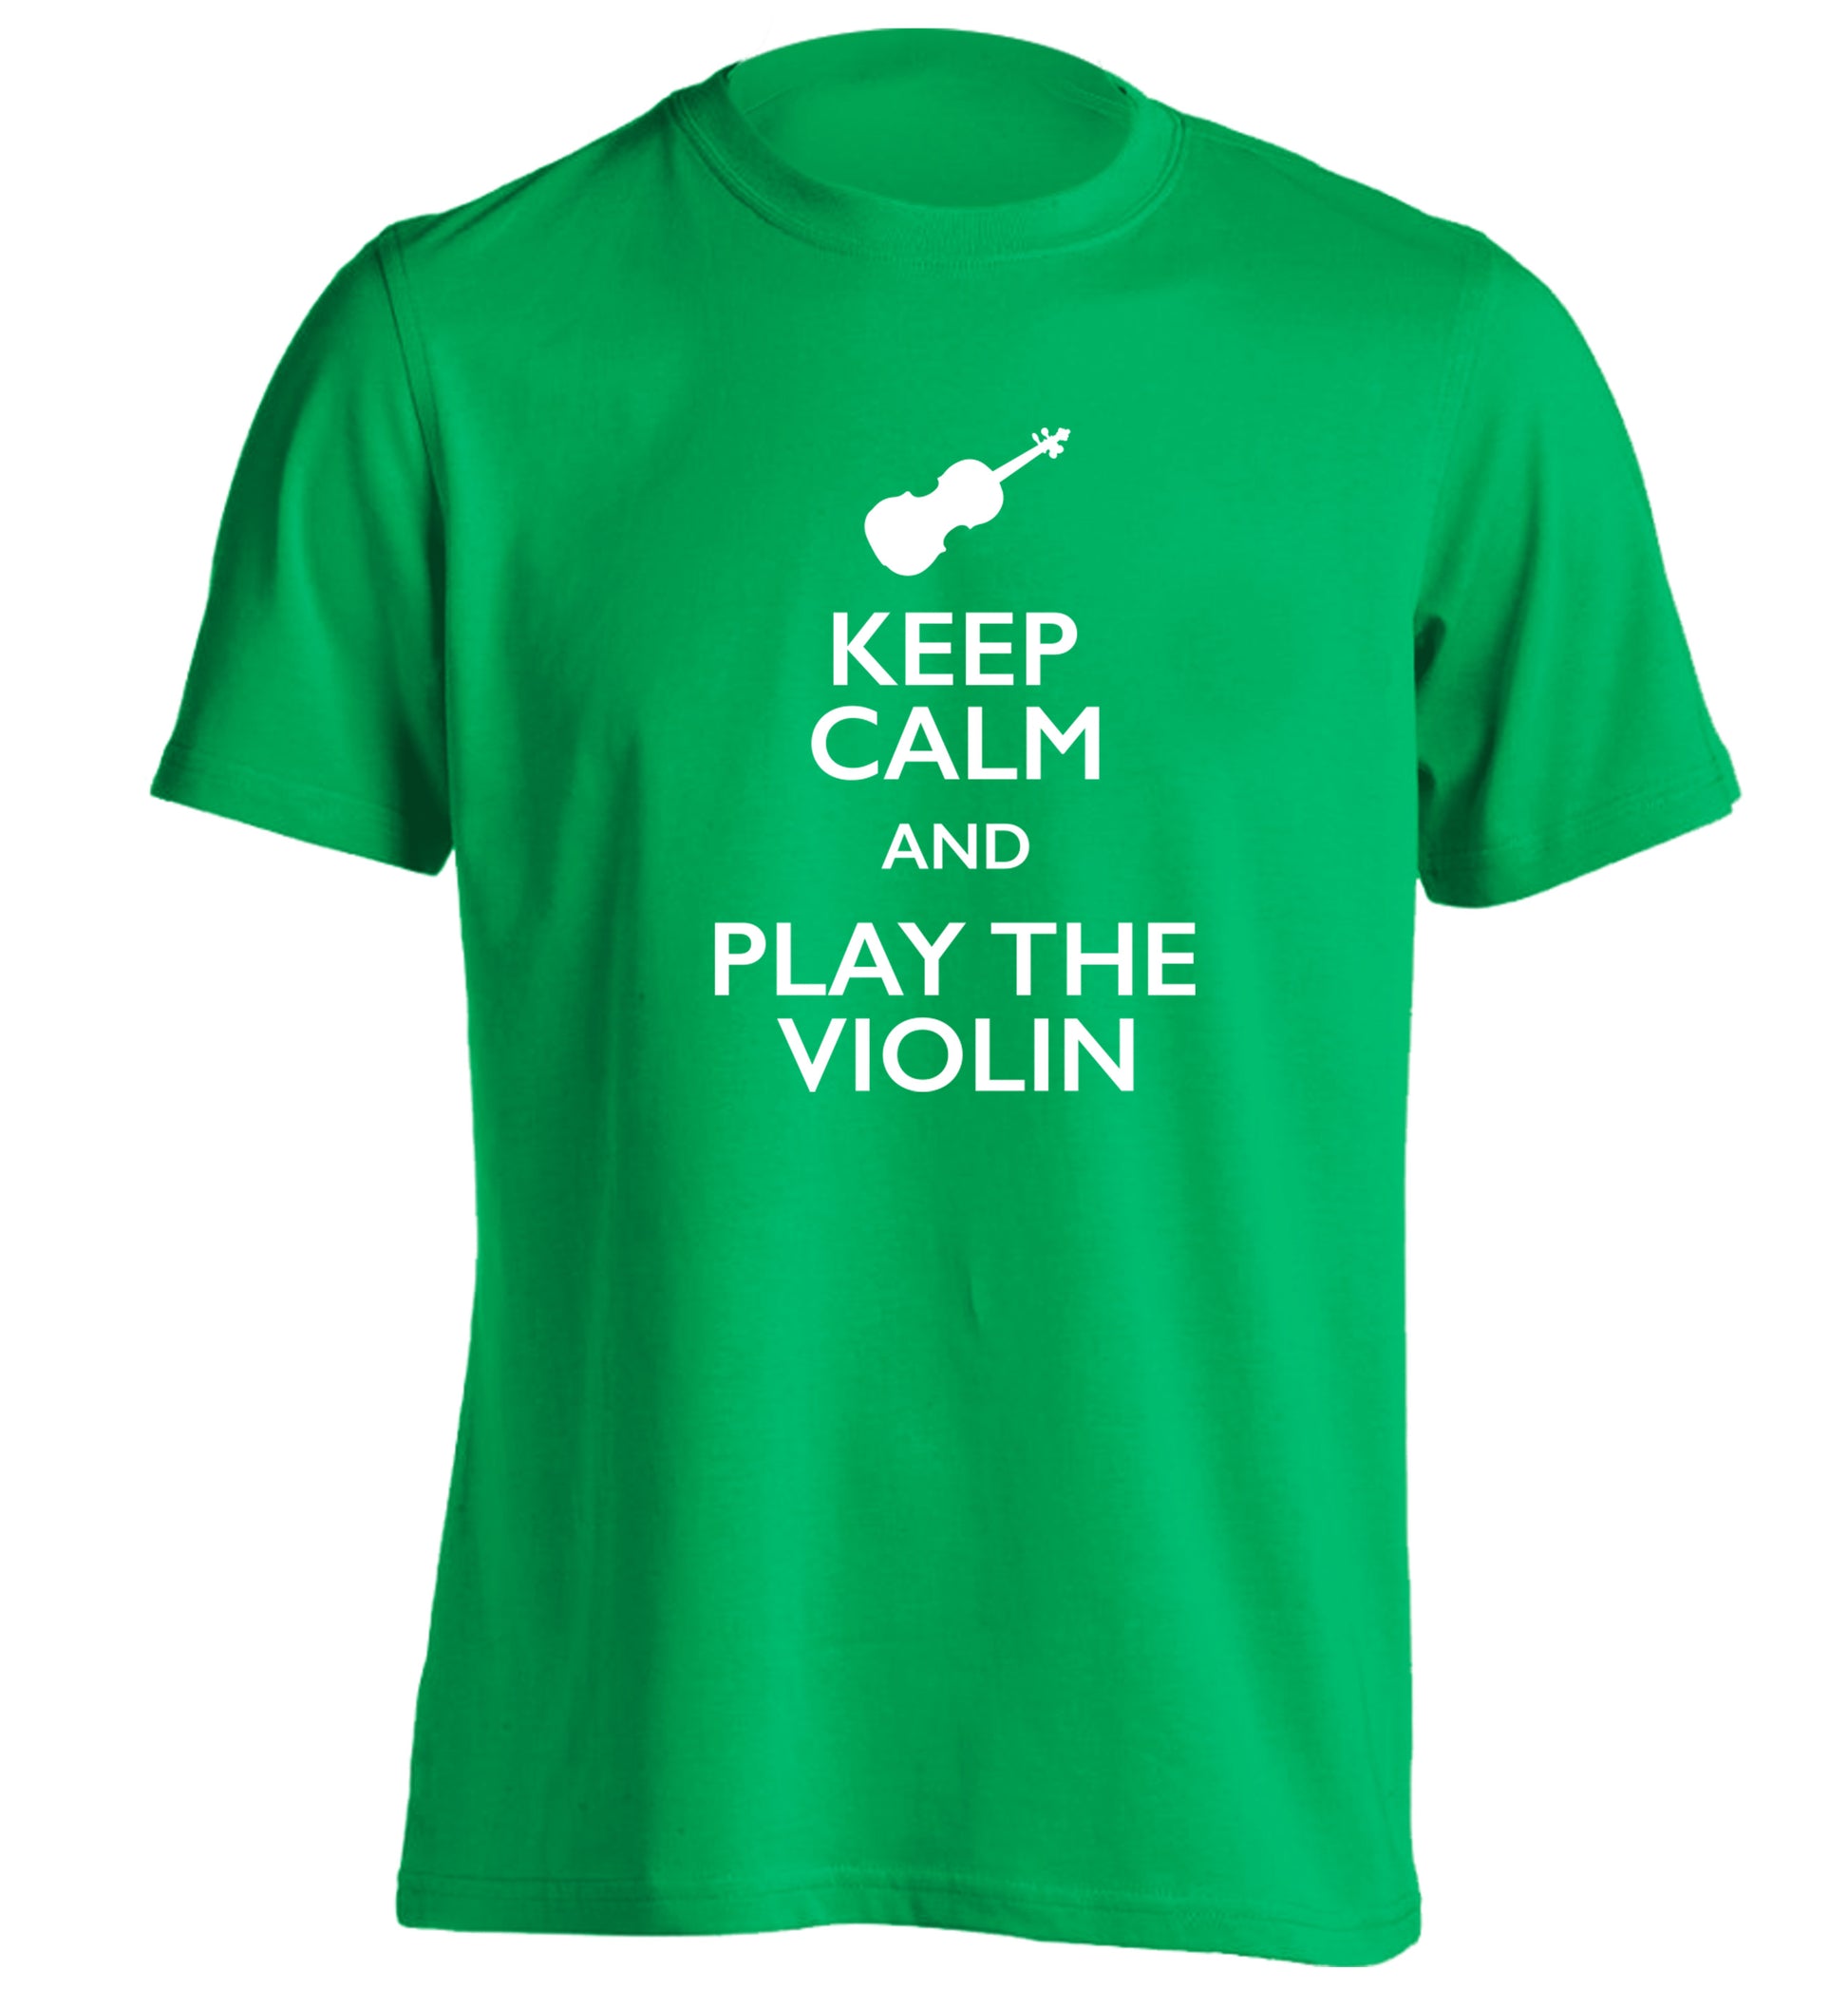 Keep calm and play the violin adults unisex green Tshirt 2XL